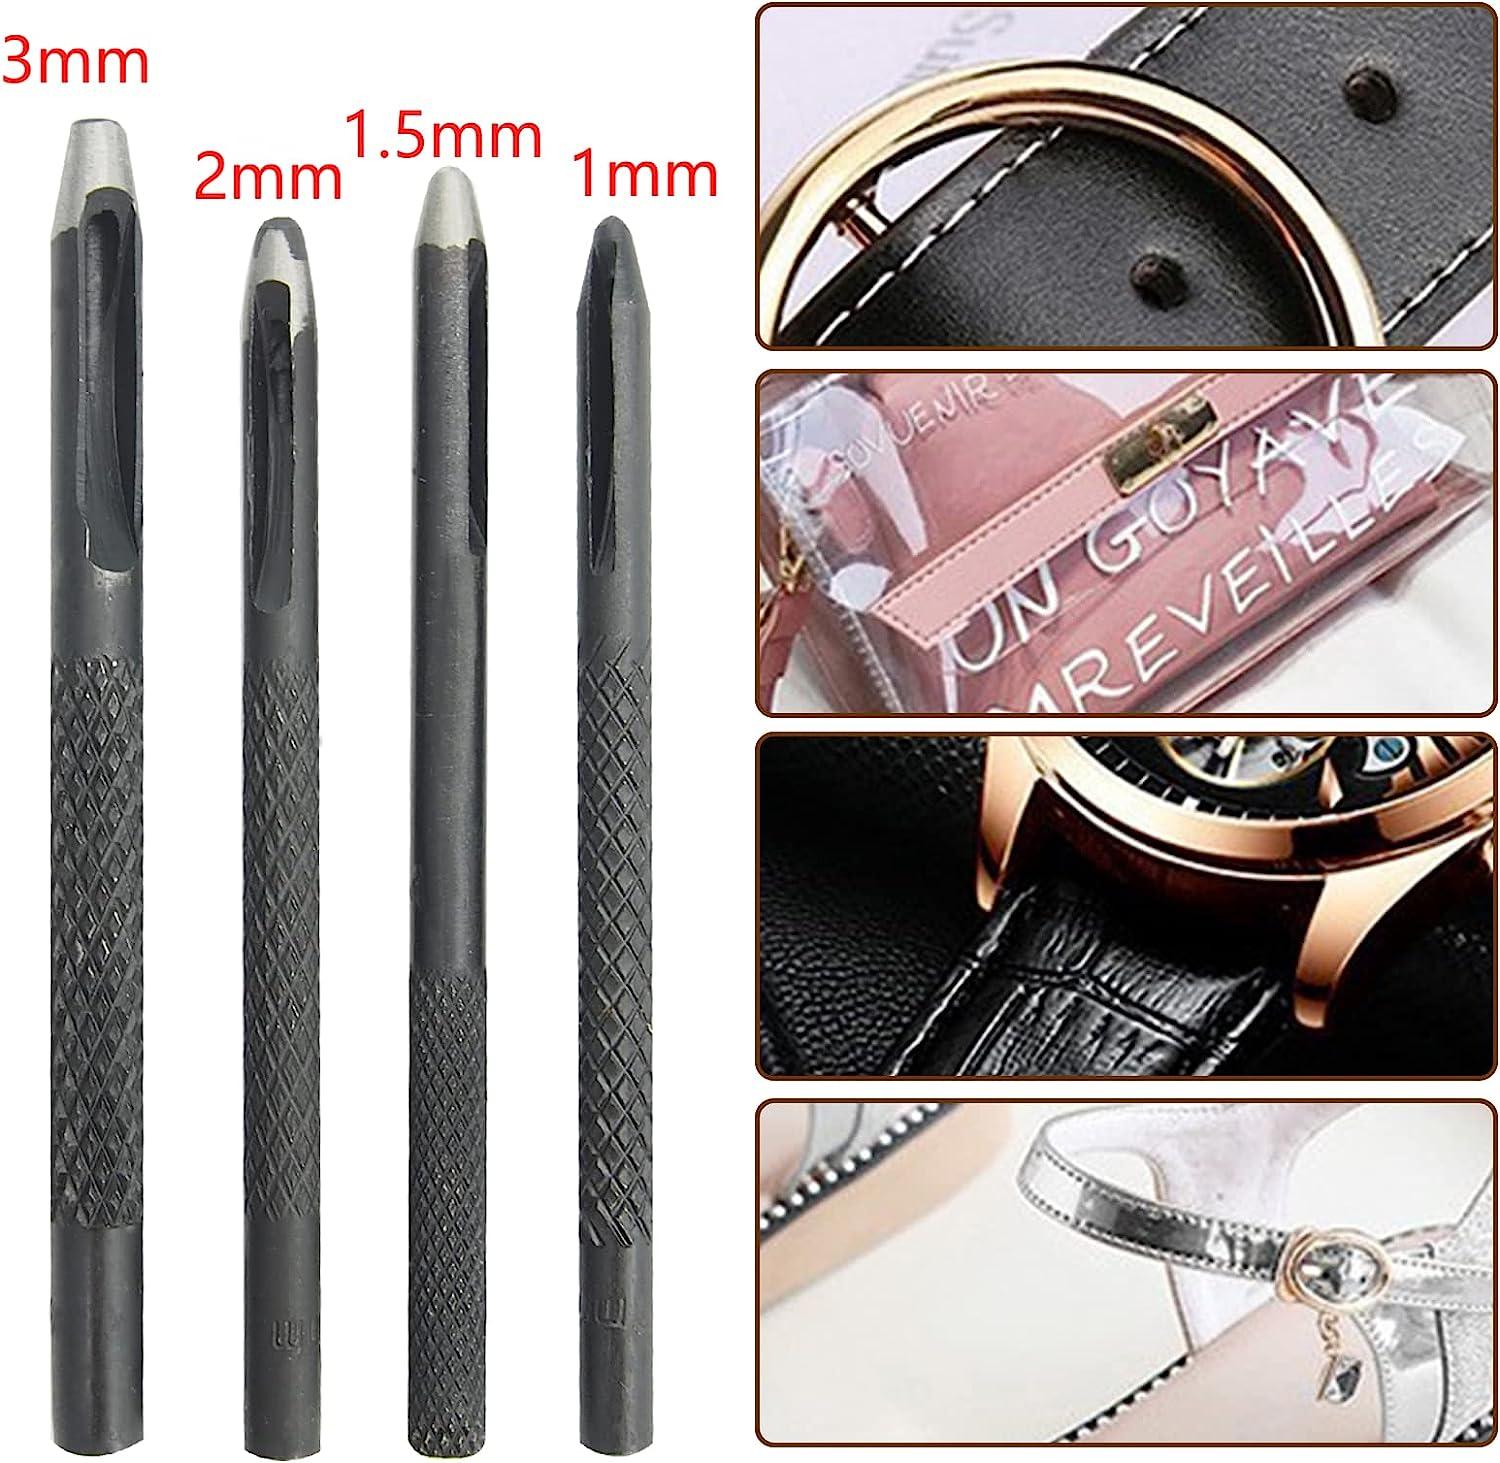 PLANTIONAL Leather Stitching Sewing Kit: 31PCS Leather Sewing Kit with 4mm  Lacing Stitching Chisel, Leather Sewing Tools, Waxed Thread and Large-Eye